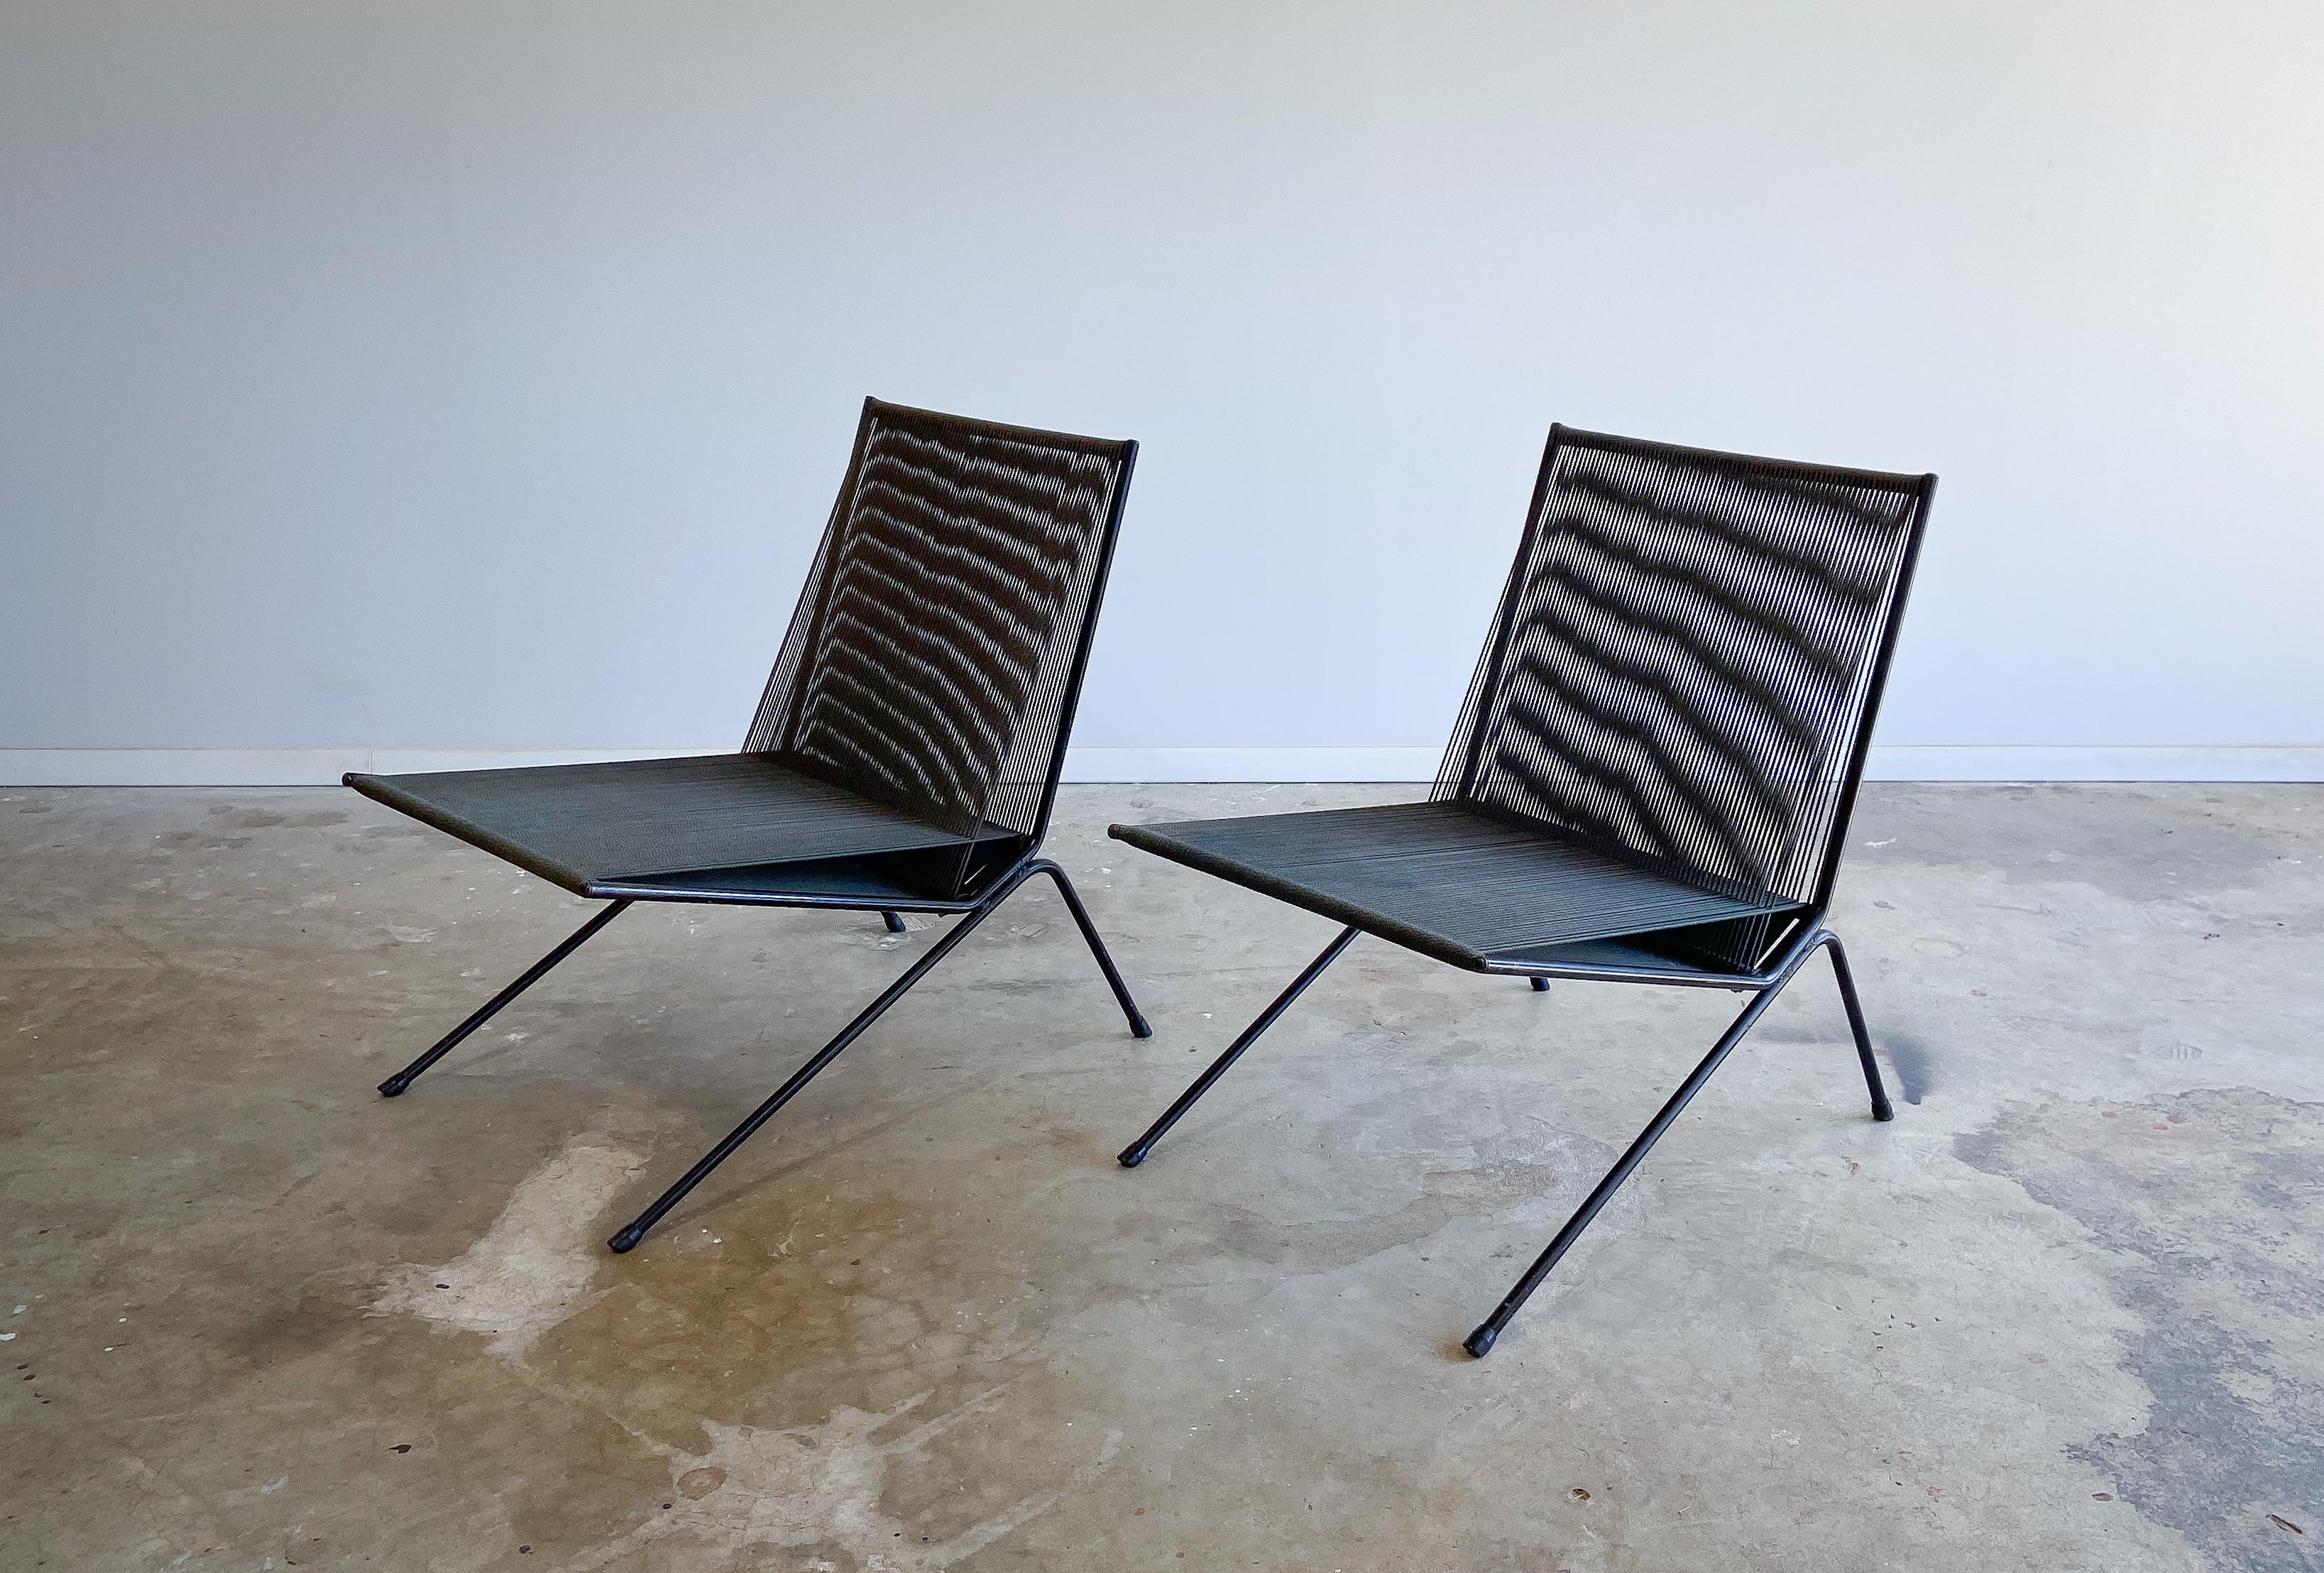 An early pair of American modern iron and string indoor/outdoor lounge chairs designed by Allan Gould for Functional Furniture. Originally introduced in 1952, we believe these to be some of the earliest examples due to the lack of welded cross